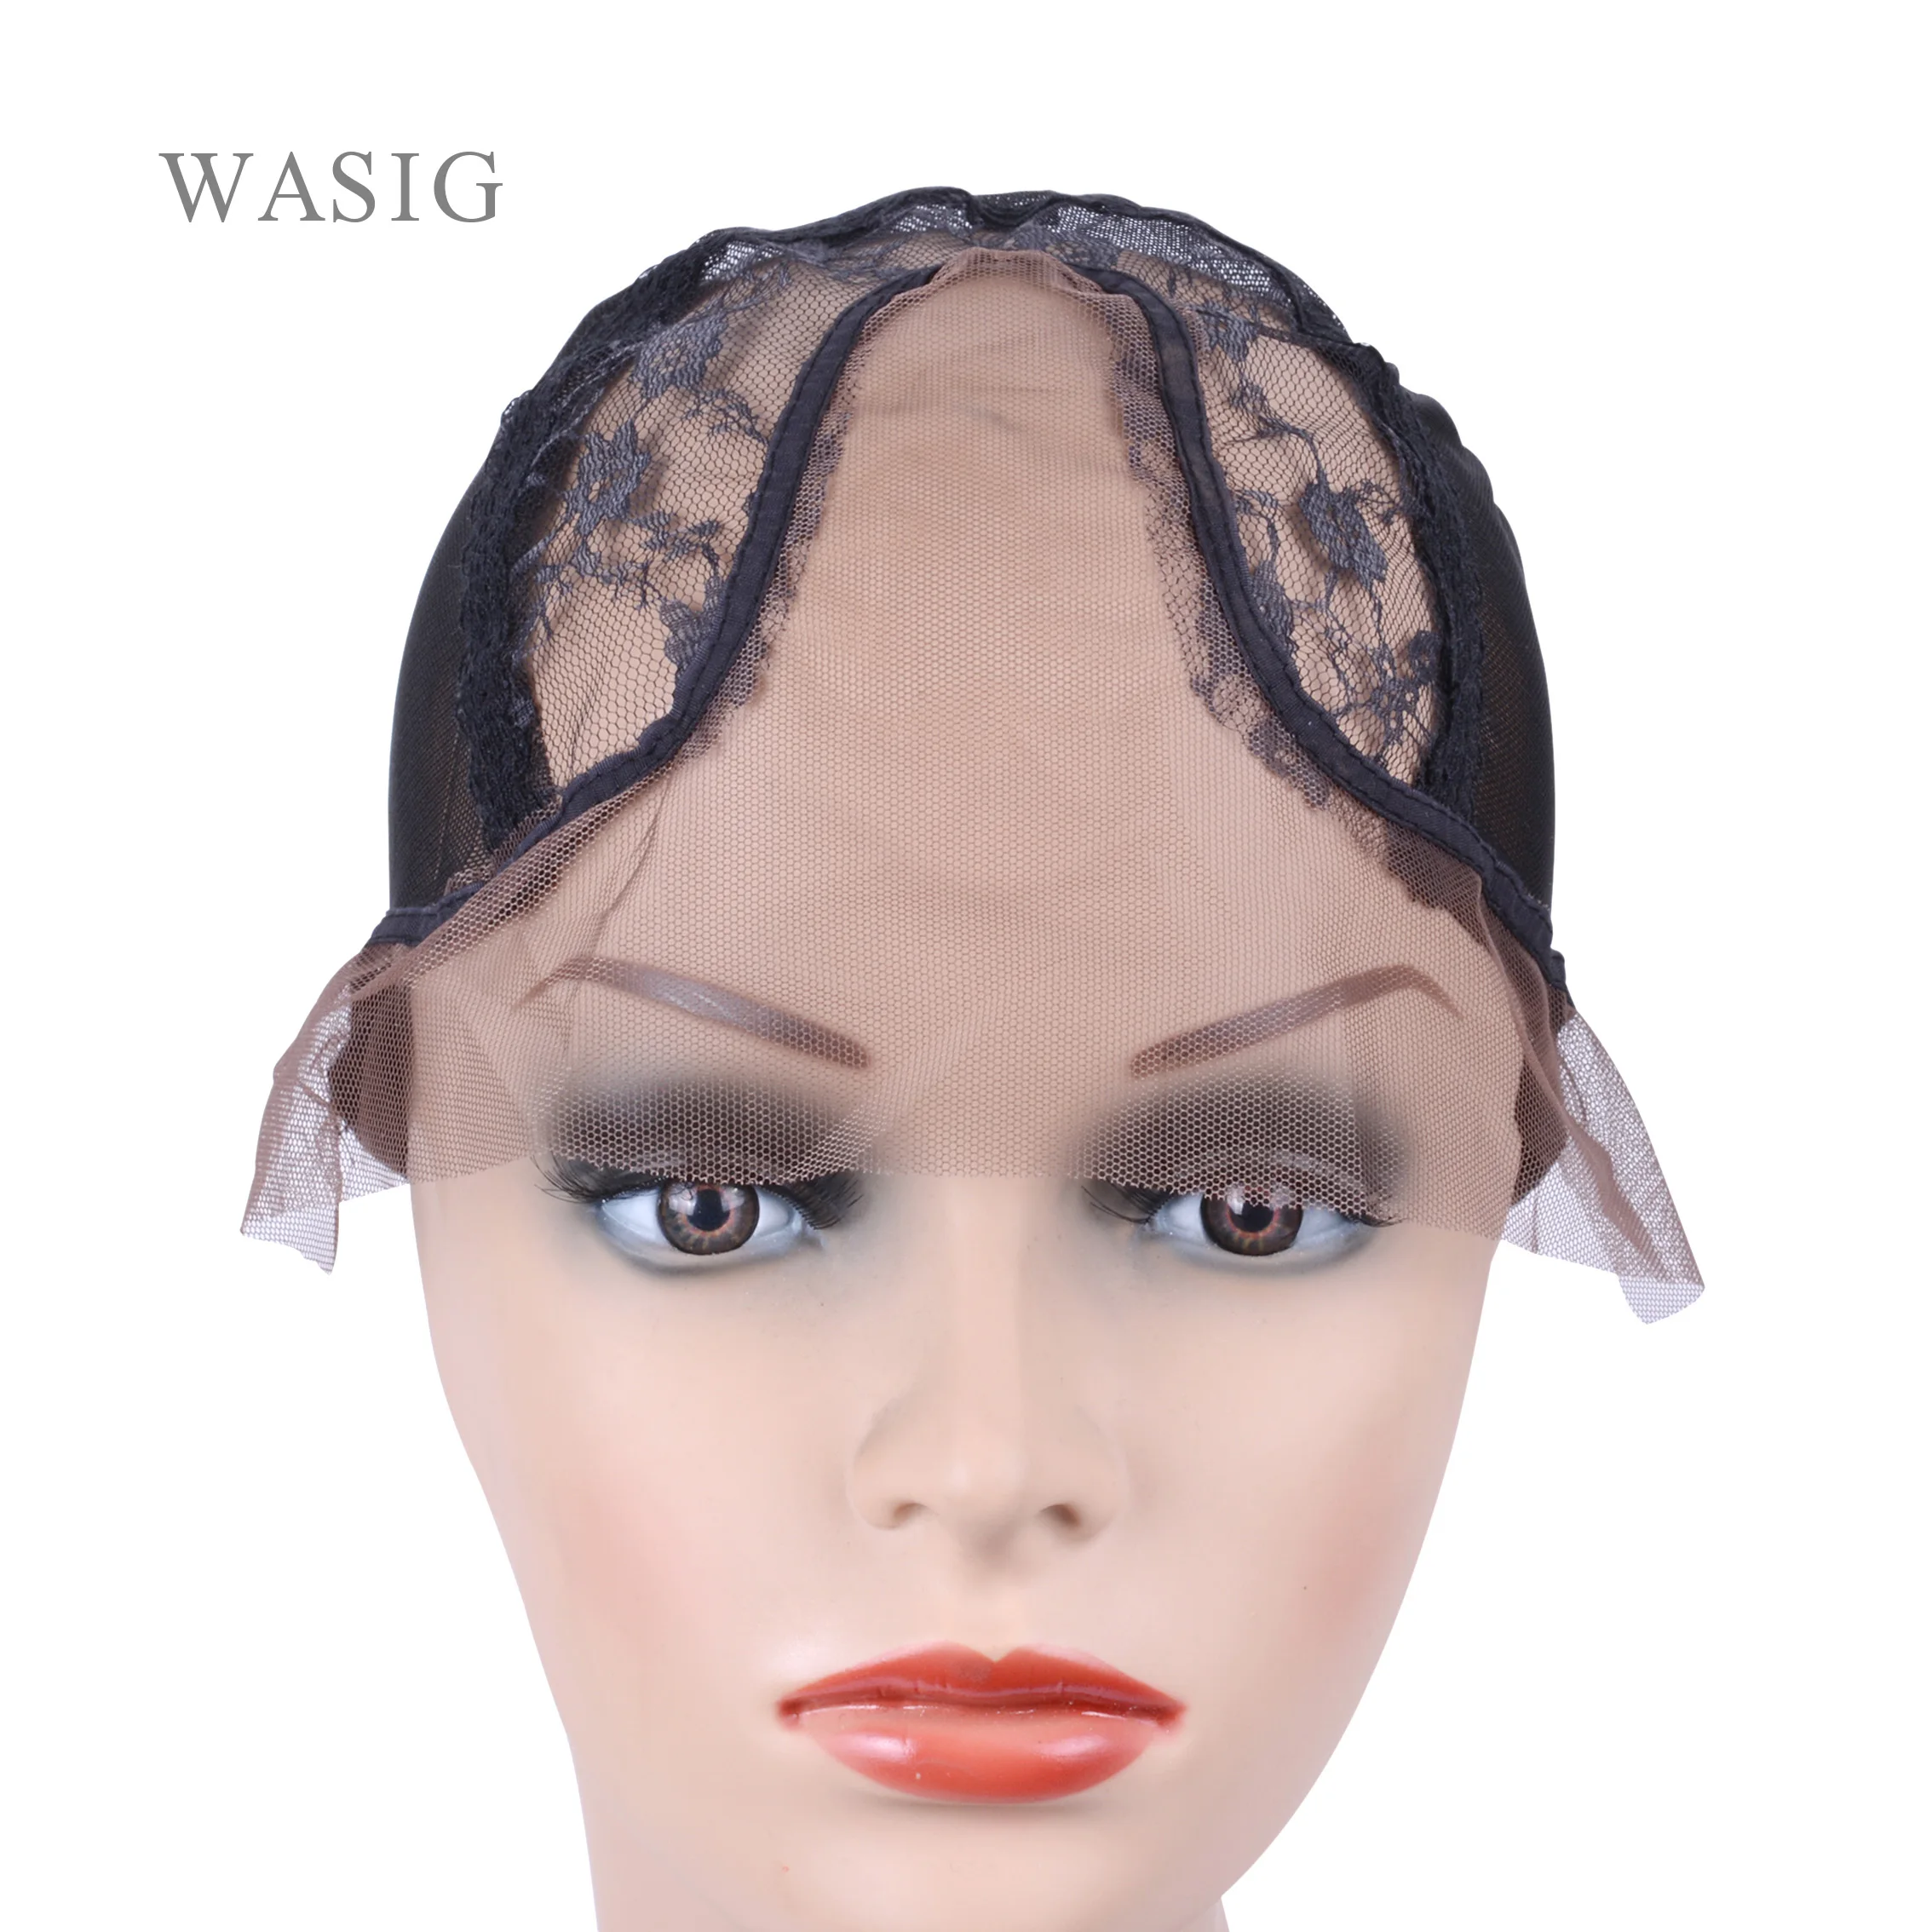 Promo Lace-Wig-Cap Making-Wigs Elastic-Strap Swiss Hairnets Back-Mesh Part for with on The qVKmq6gL